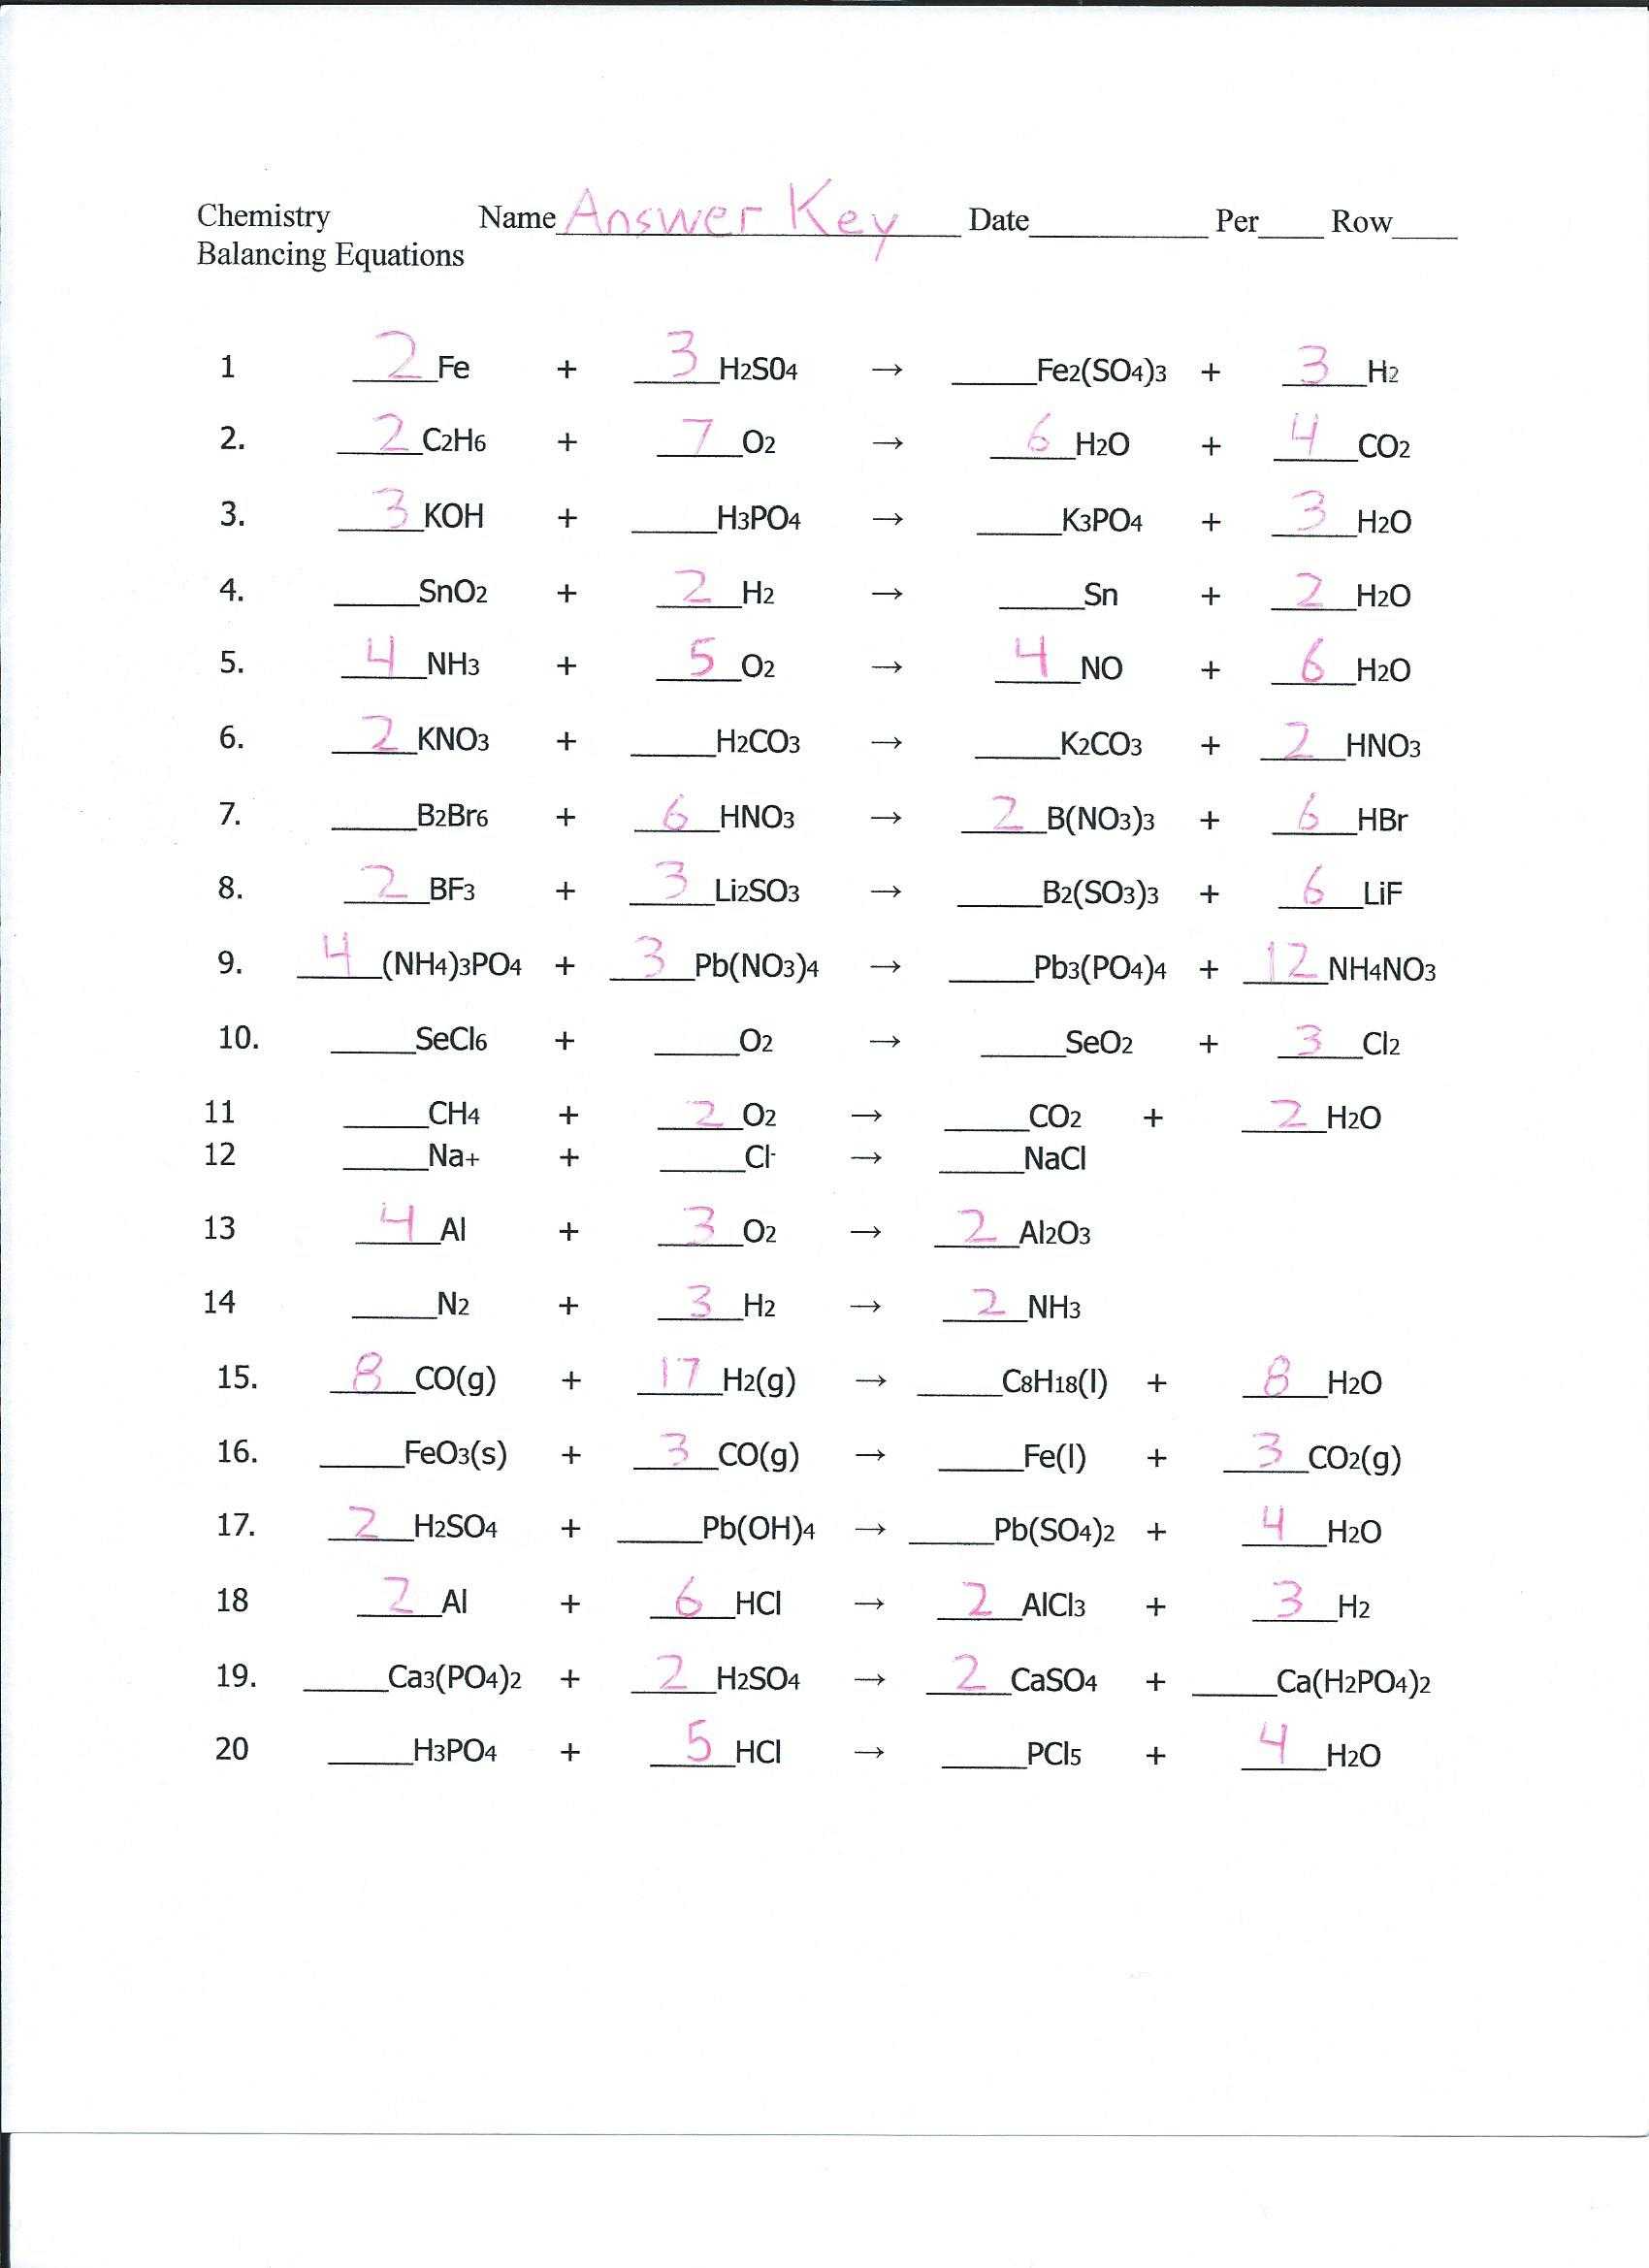 Chemical Reaction Worksheet Answers Along with Understanding Chemical Equations Worksheet Answers the Best